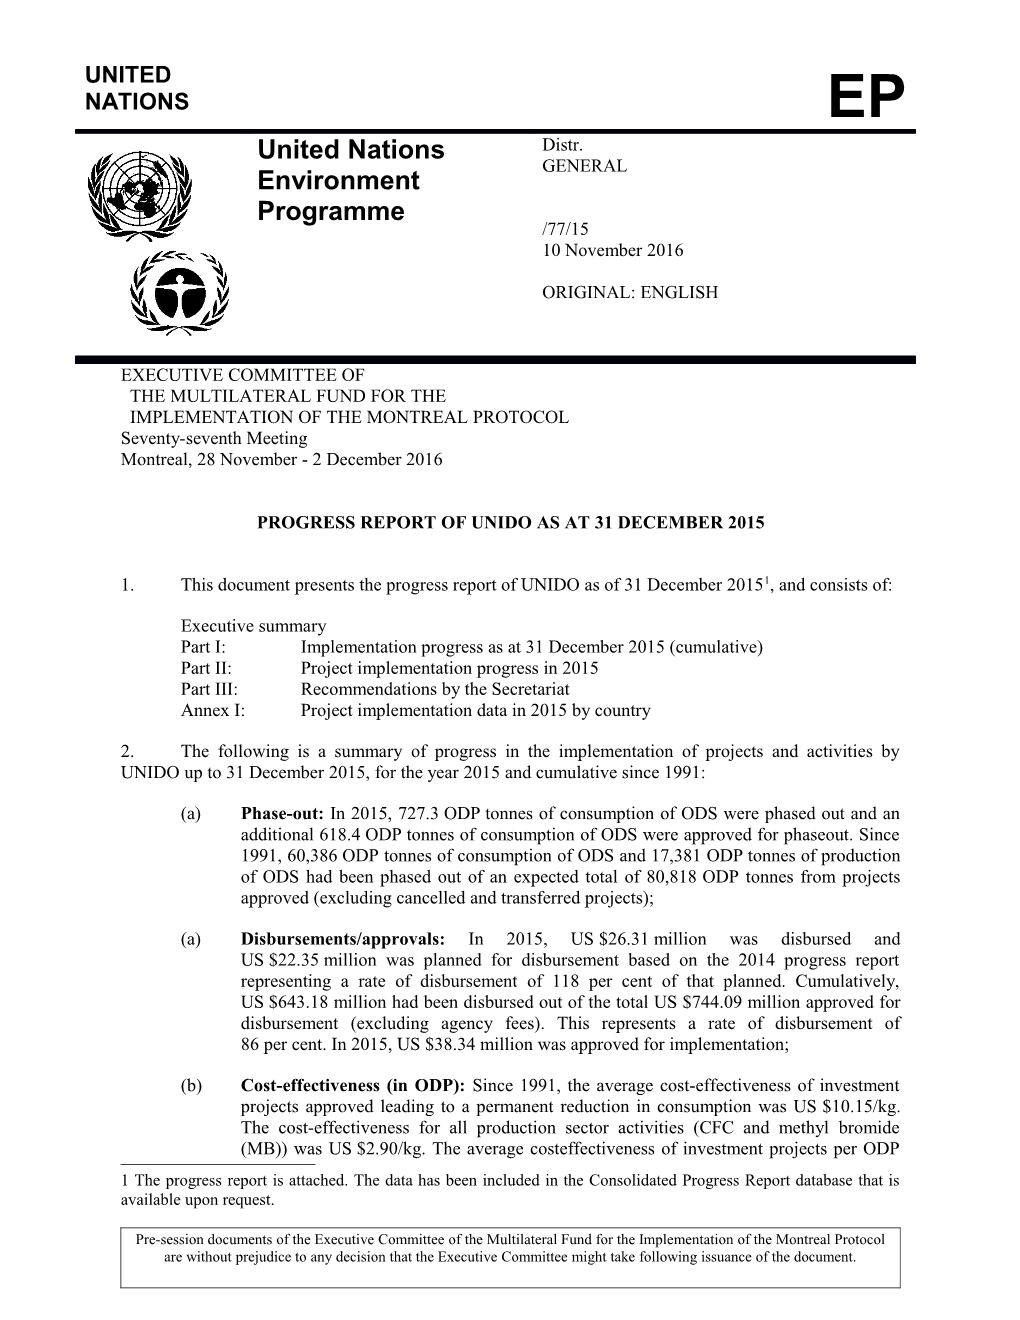 Progress Report of UNIDO As at 31 December 2015 (Part 1)